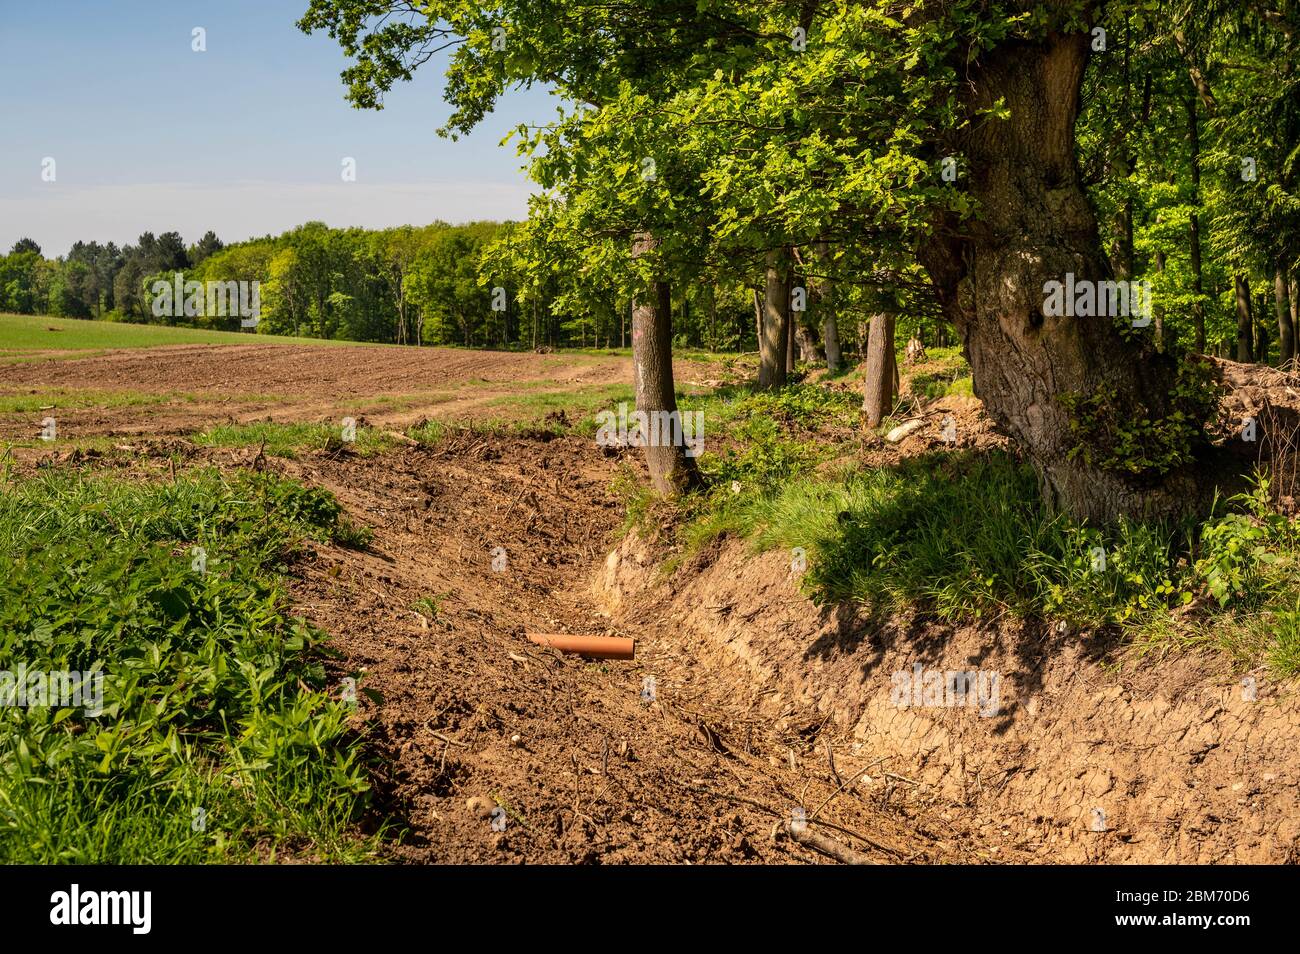 Drainage ditch near trees at edge of field. Stock Photo